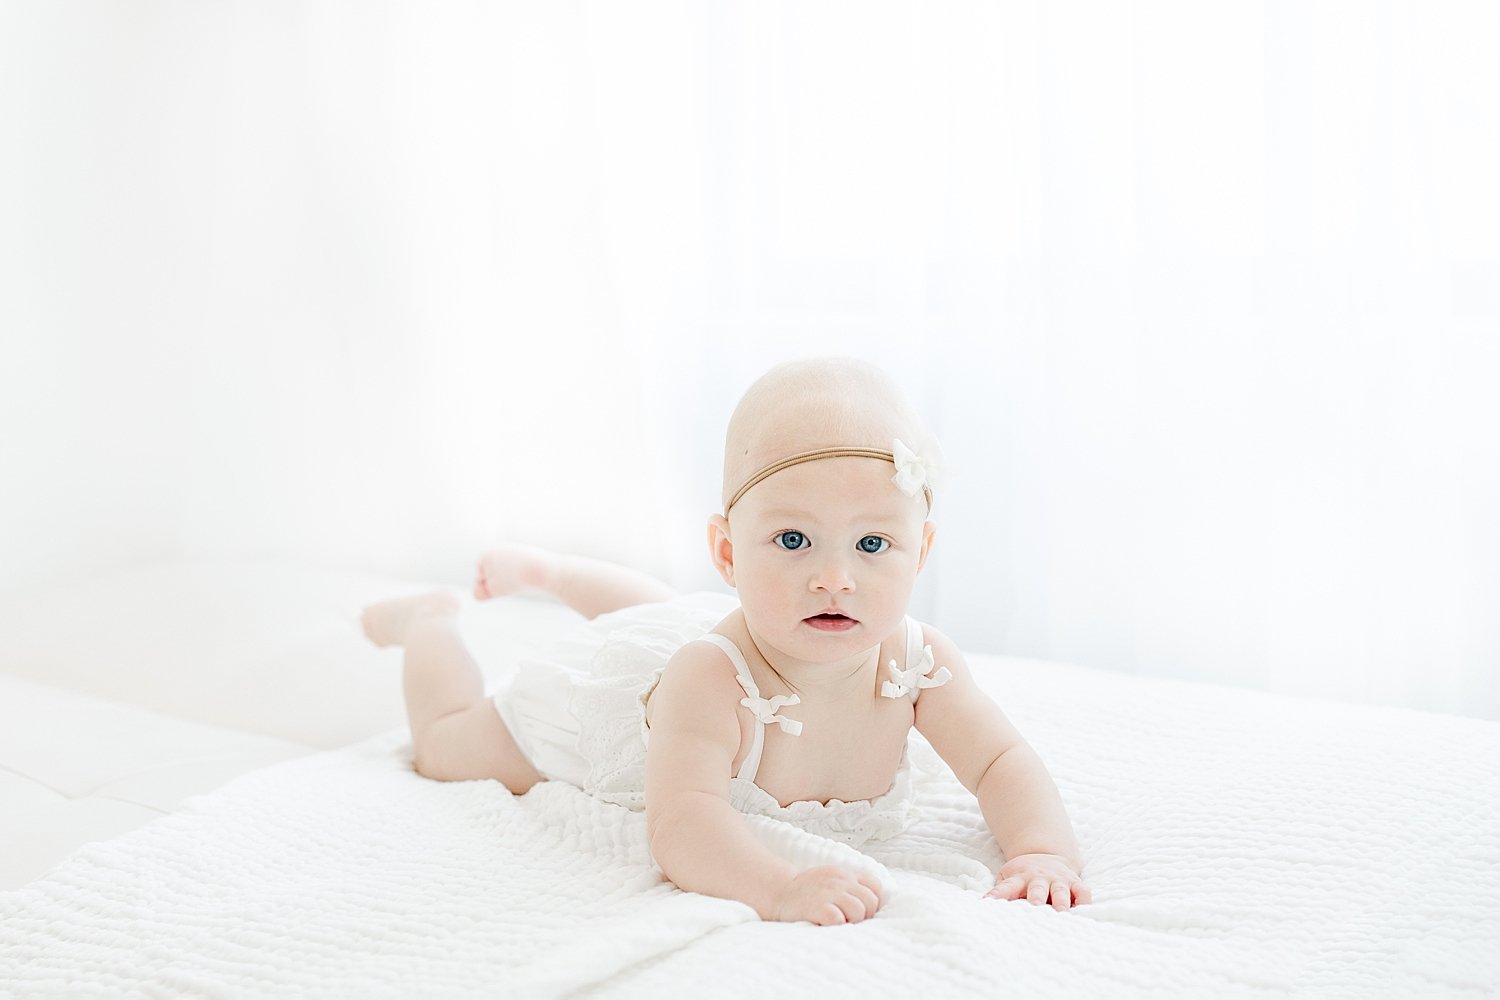 Baby girl on bed for milestone session at eight months with Kristin Wood Photography.